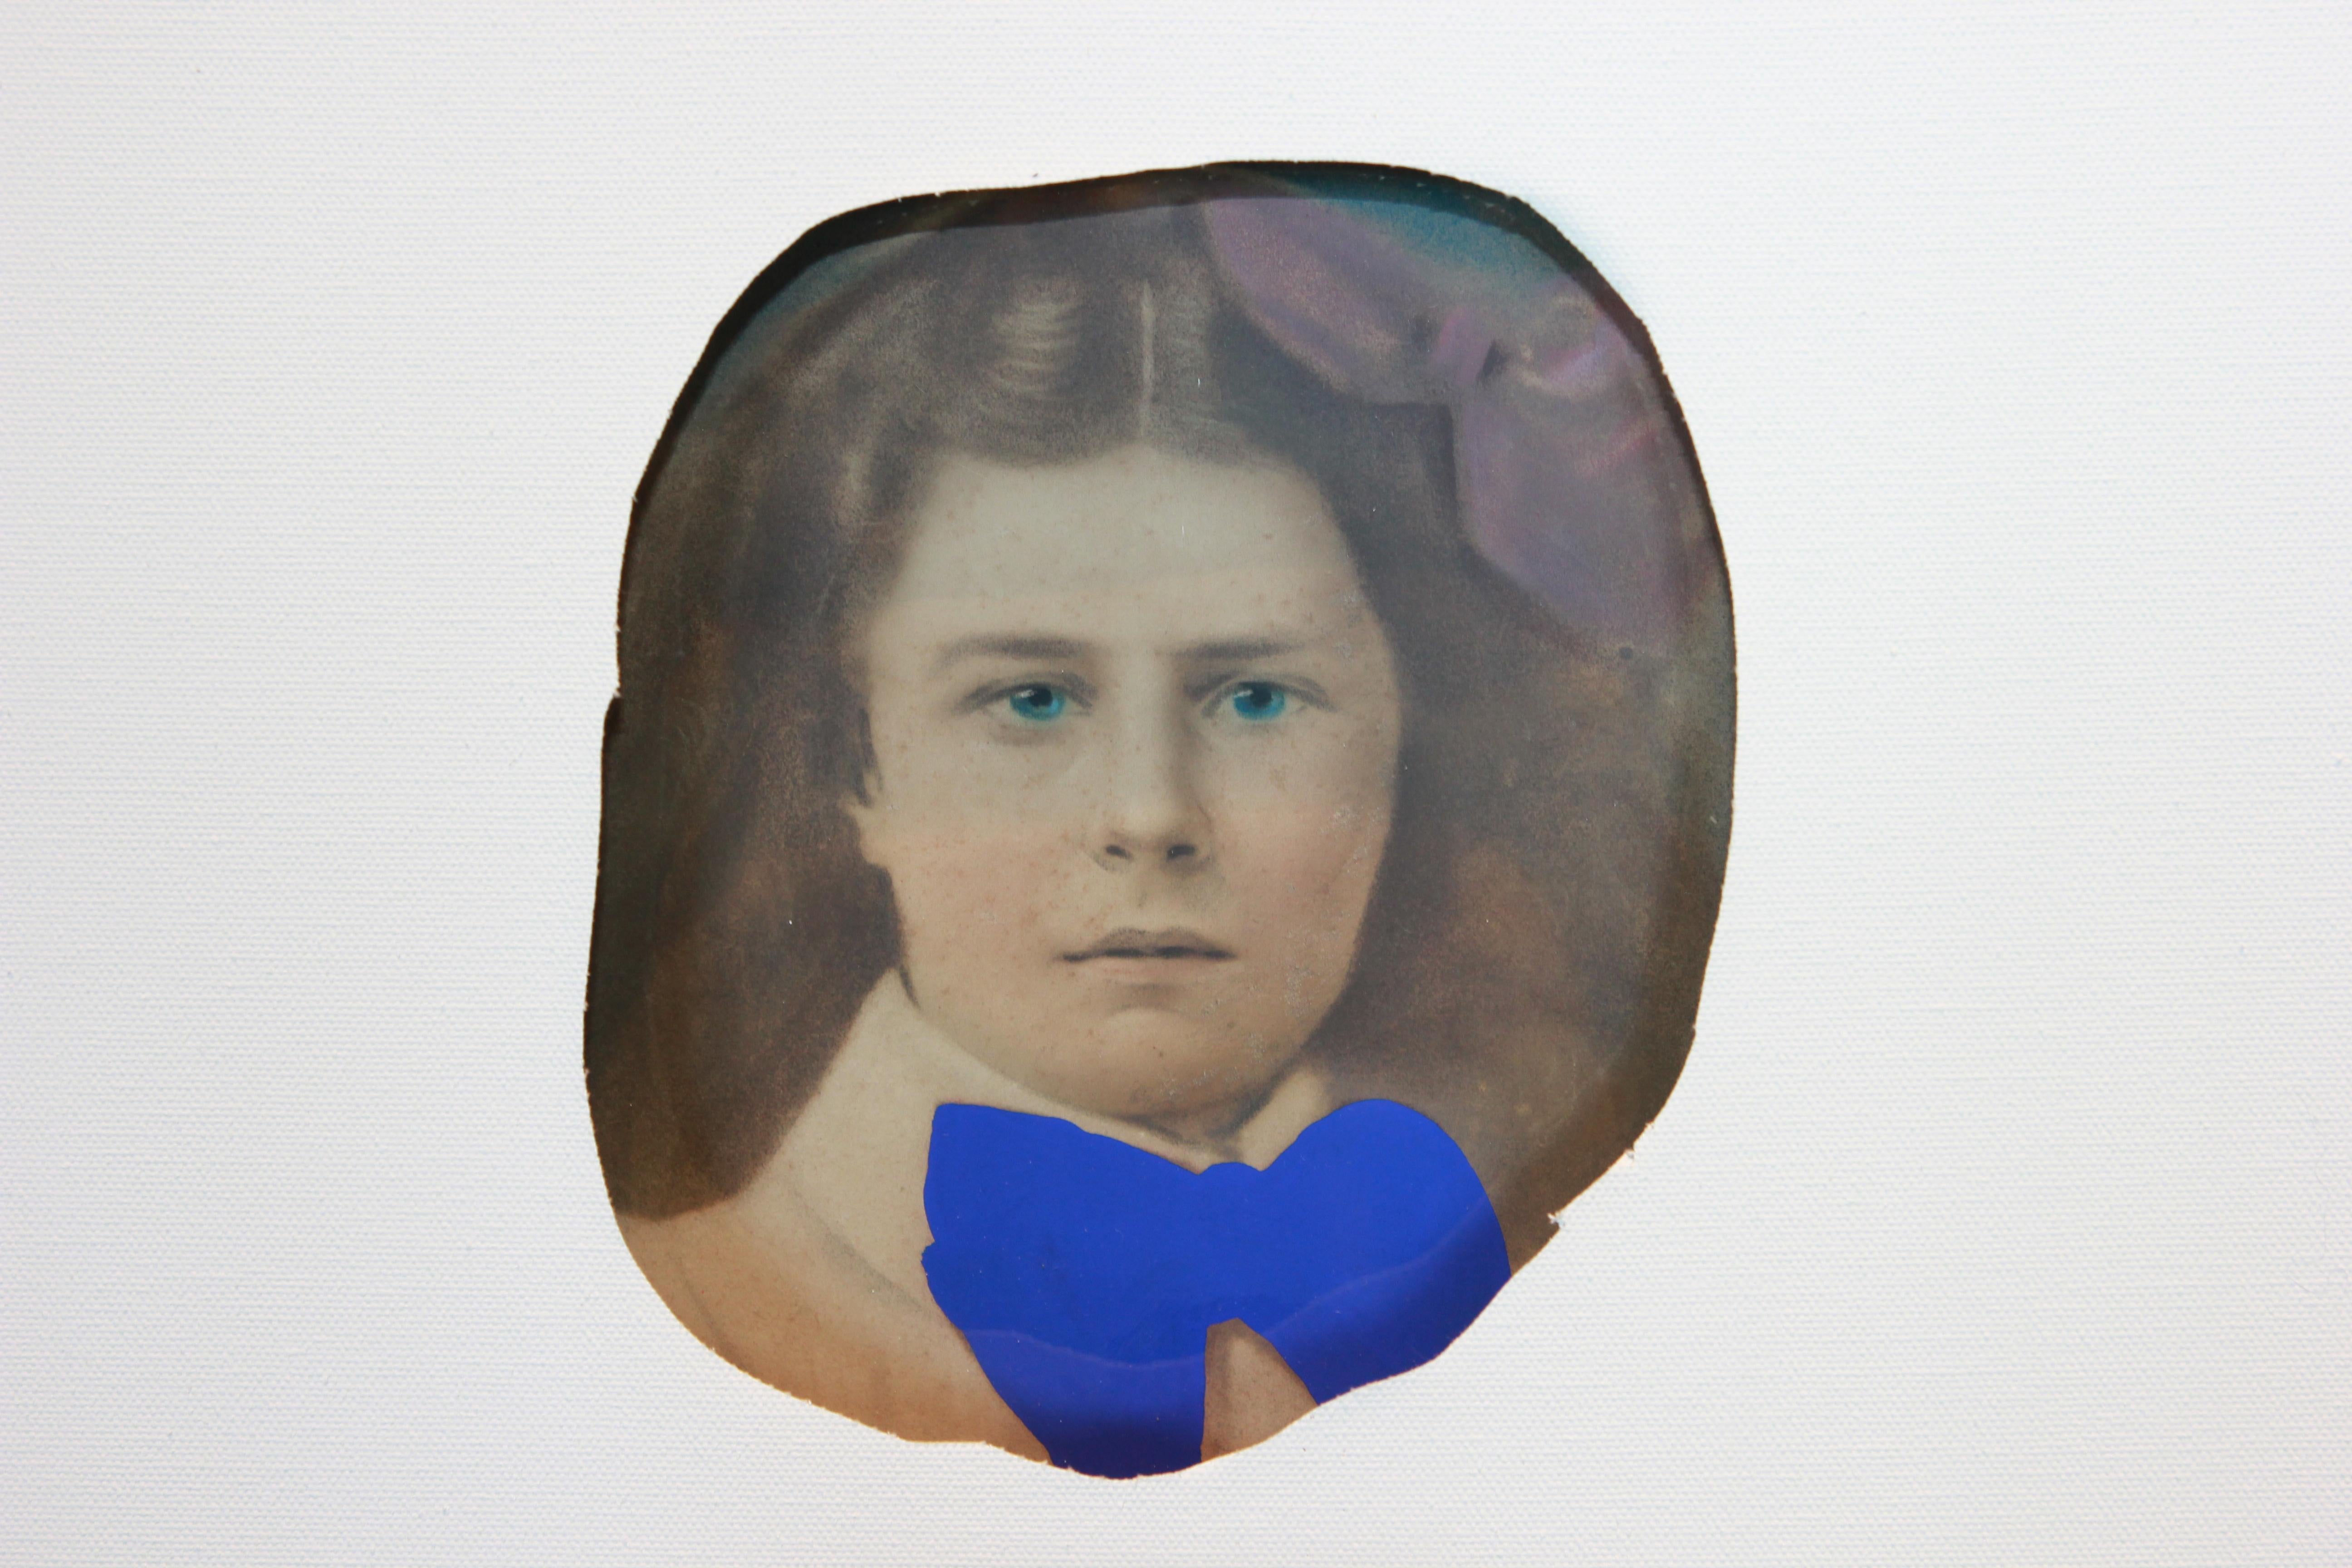 White Canvas Wrapped Portrait with Bright Blue Bow Tie - Painting by Matthew Reeves